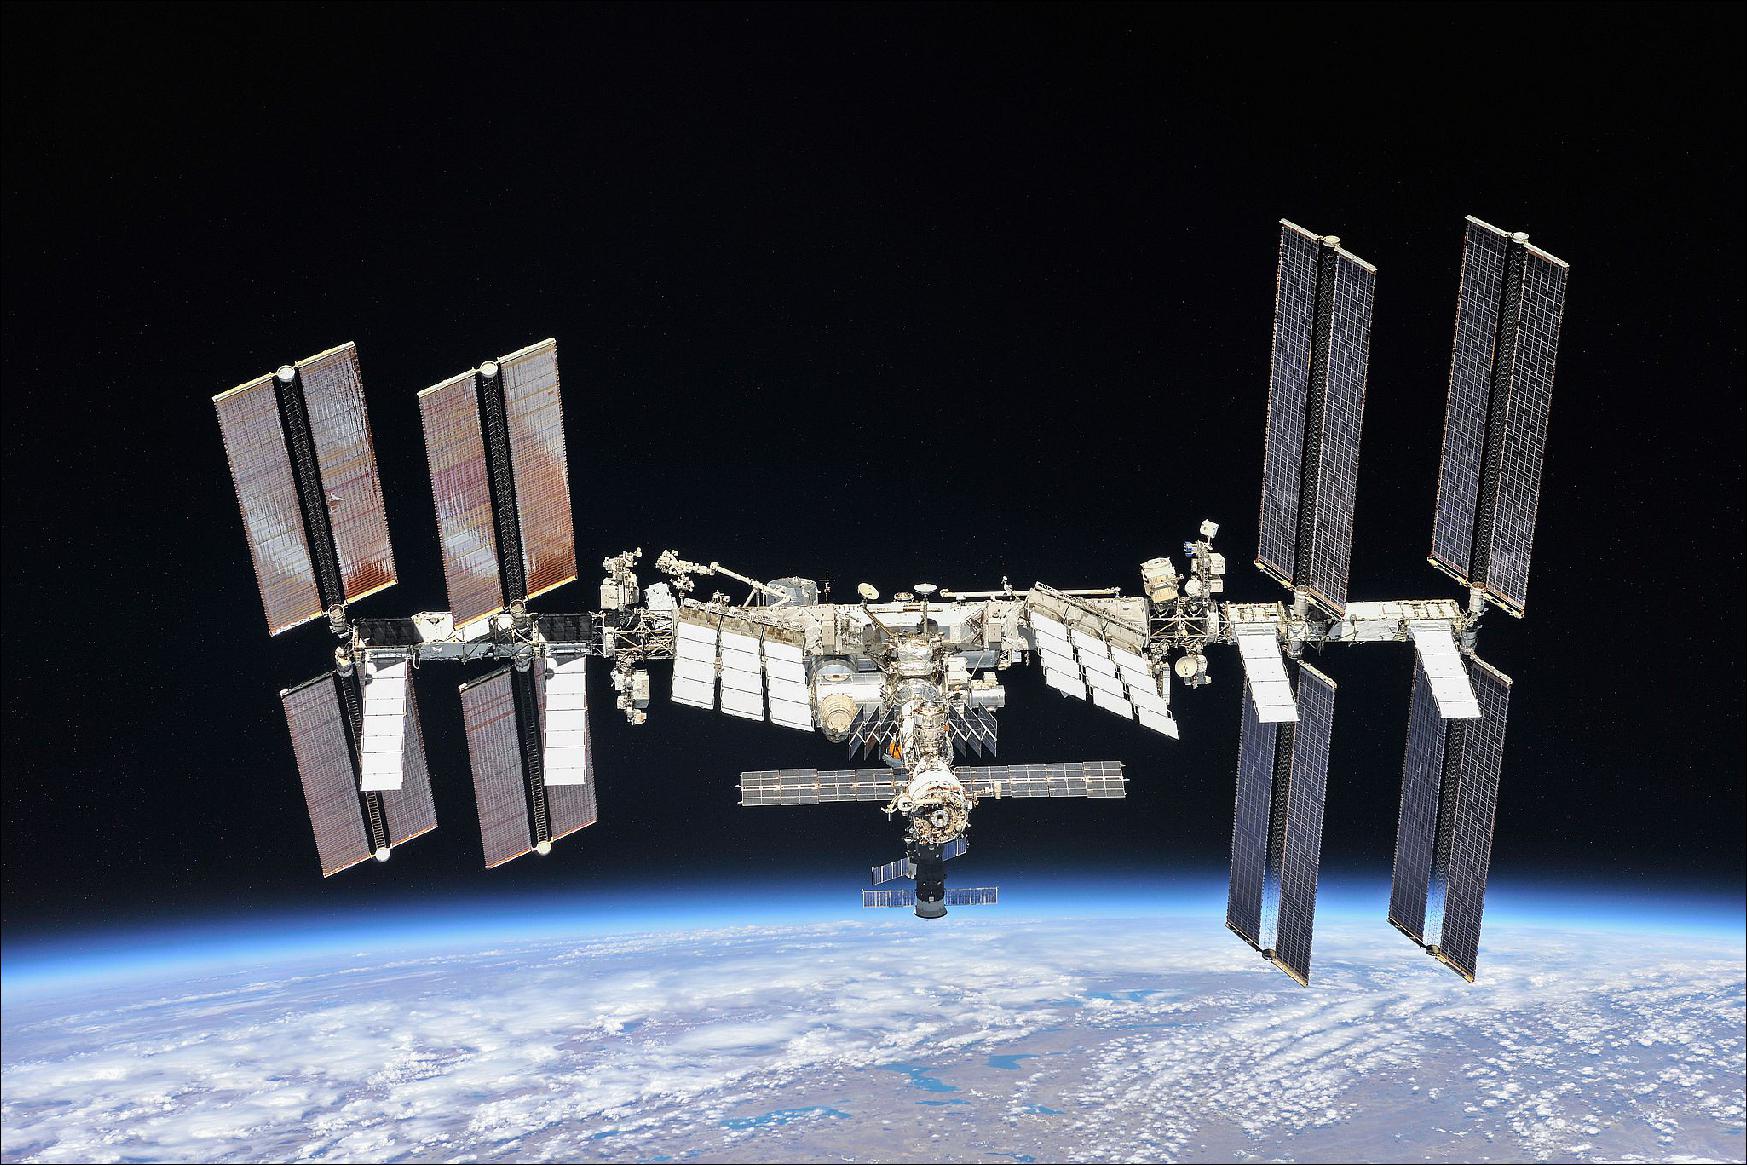 Figure 17: The fully constructed International Space Station orbits Earth roughly 250 miles (~400 km) up, continuously crewed to continue its vital mission to conduct microgravity research and experiments, ranging from human biology and physiology to astronomy and materials science, aboard humanity’s only orbital laboratory. (image credit: NASA)